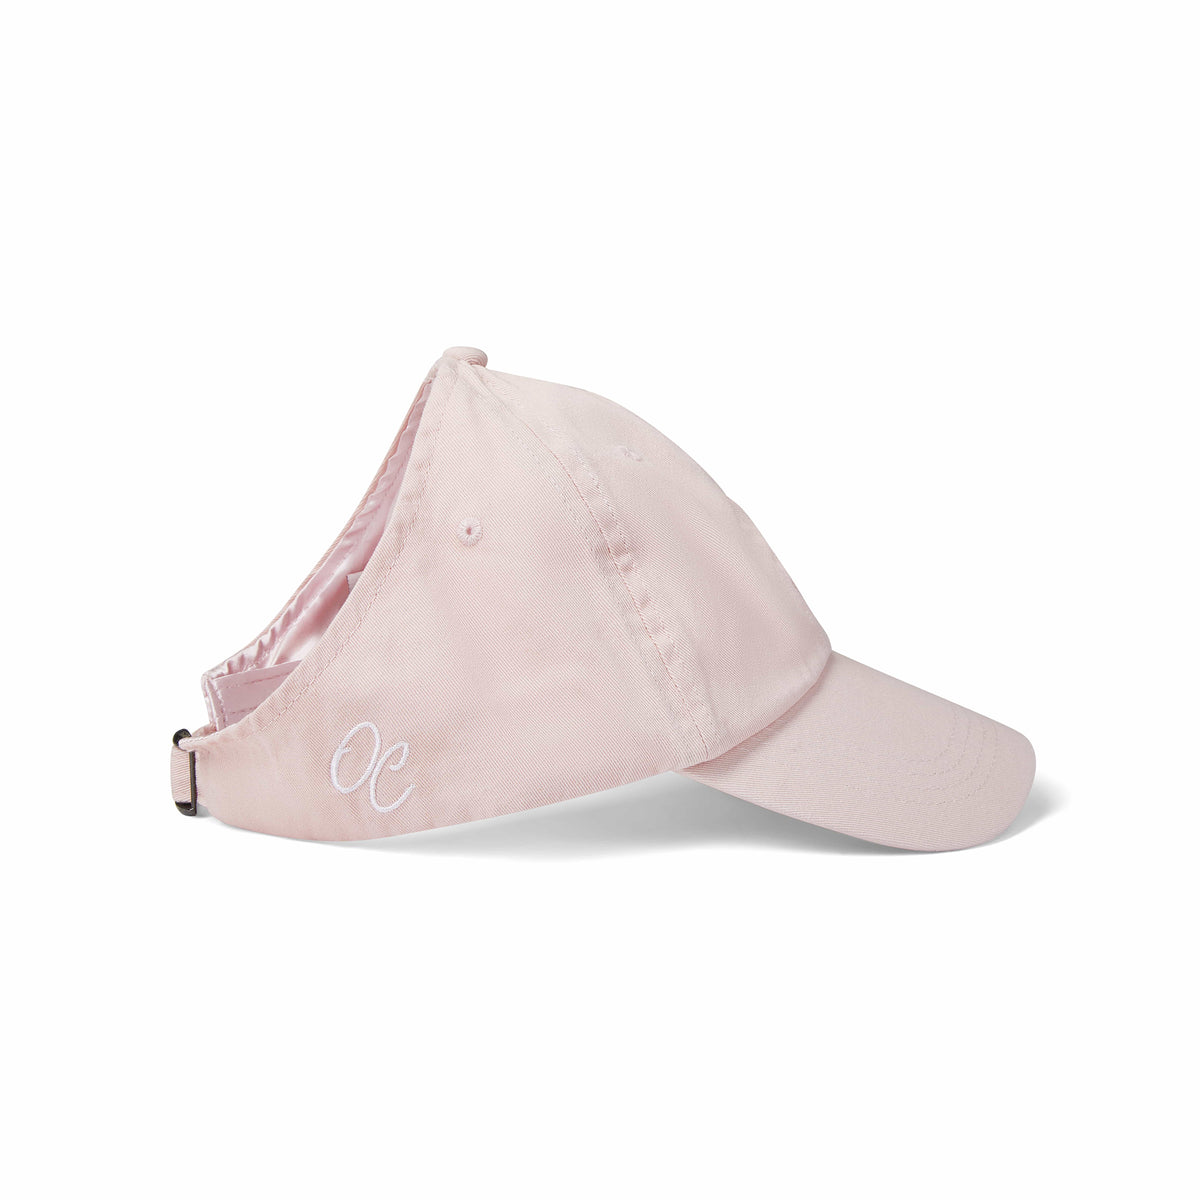 Only Curls Satin Lined Baseball Hat (with open back) - Pink - Only Curls